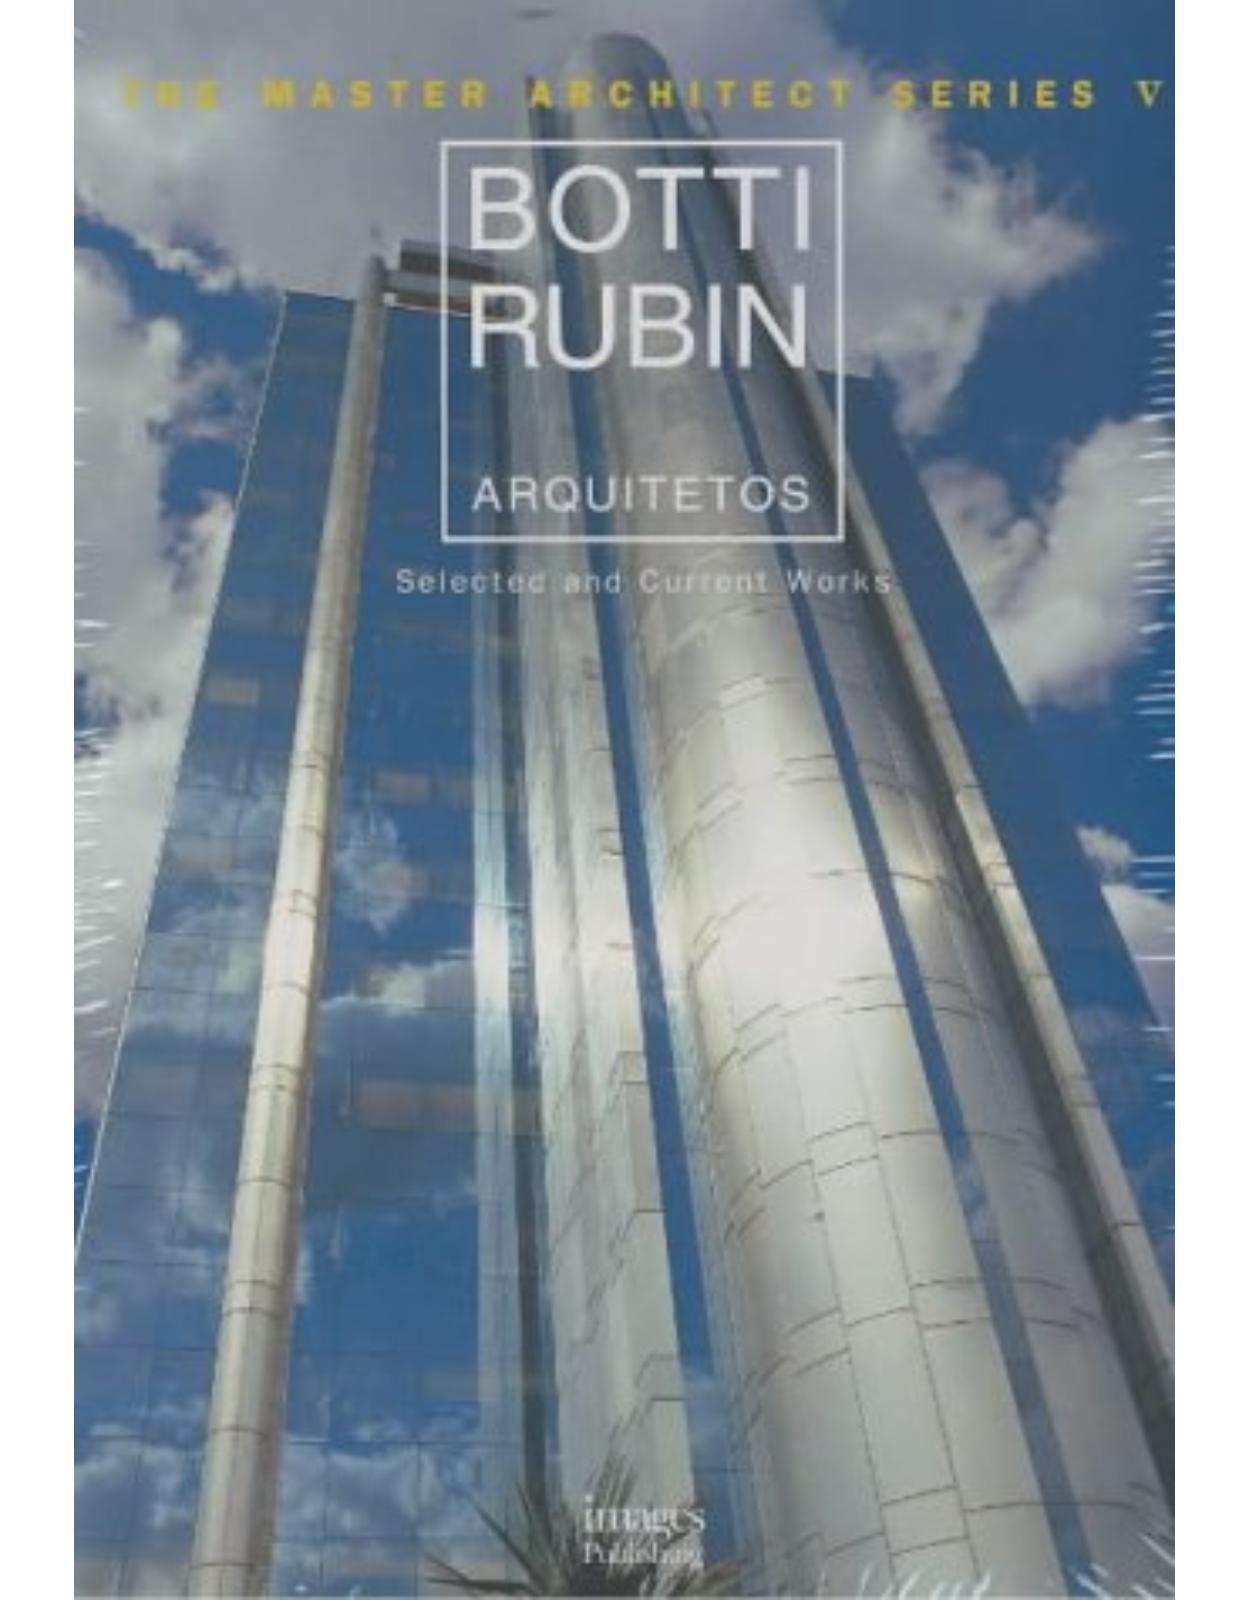 Botti Rubin Arquitetos: Selected and Current Works (Master Architect Series V)